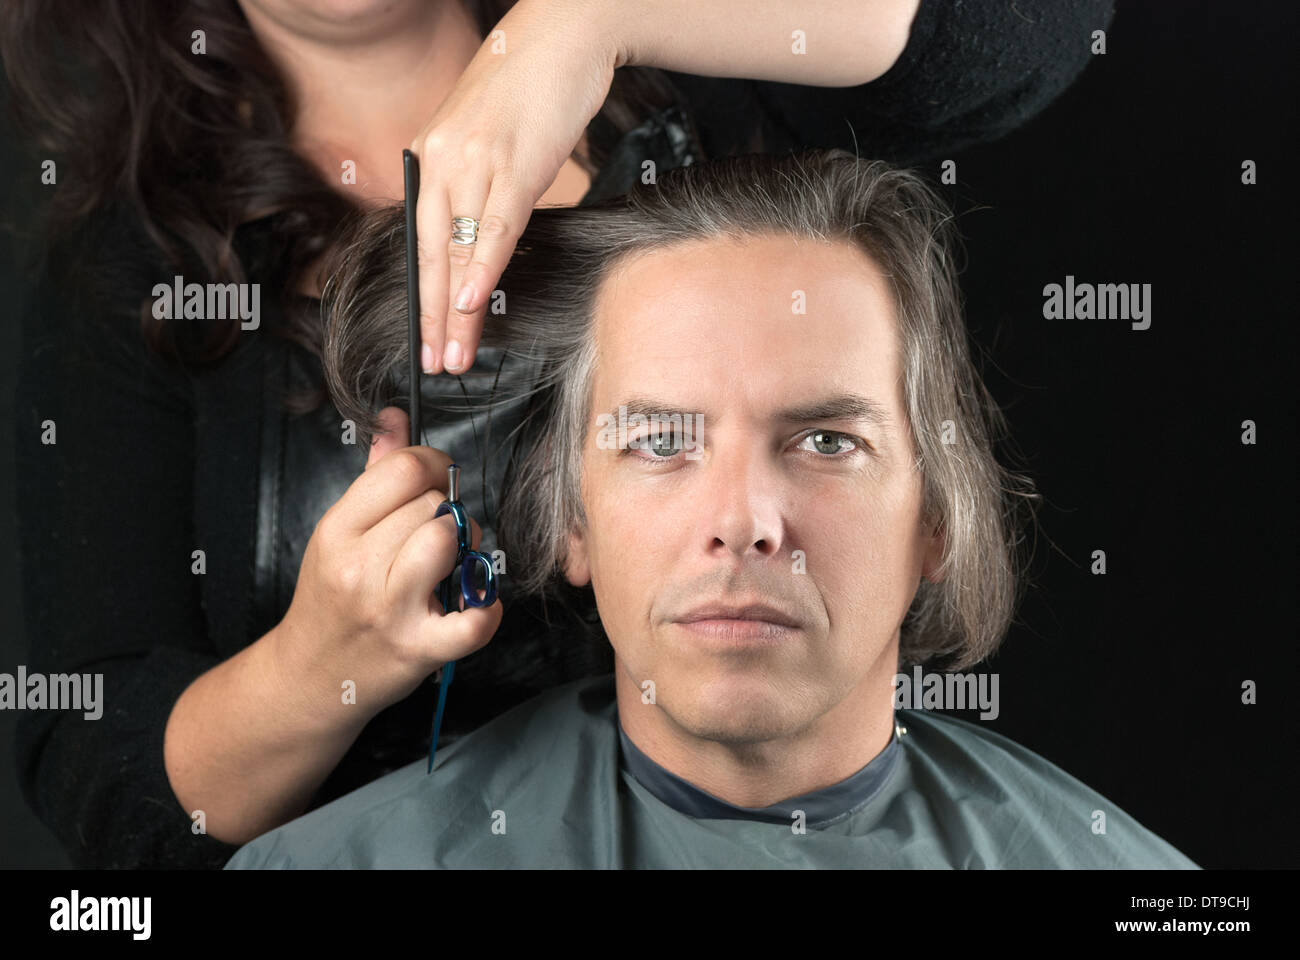 Man Getting Long Hair Cut Off For Cancer Fundraiser Stock Photo